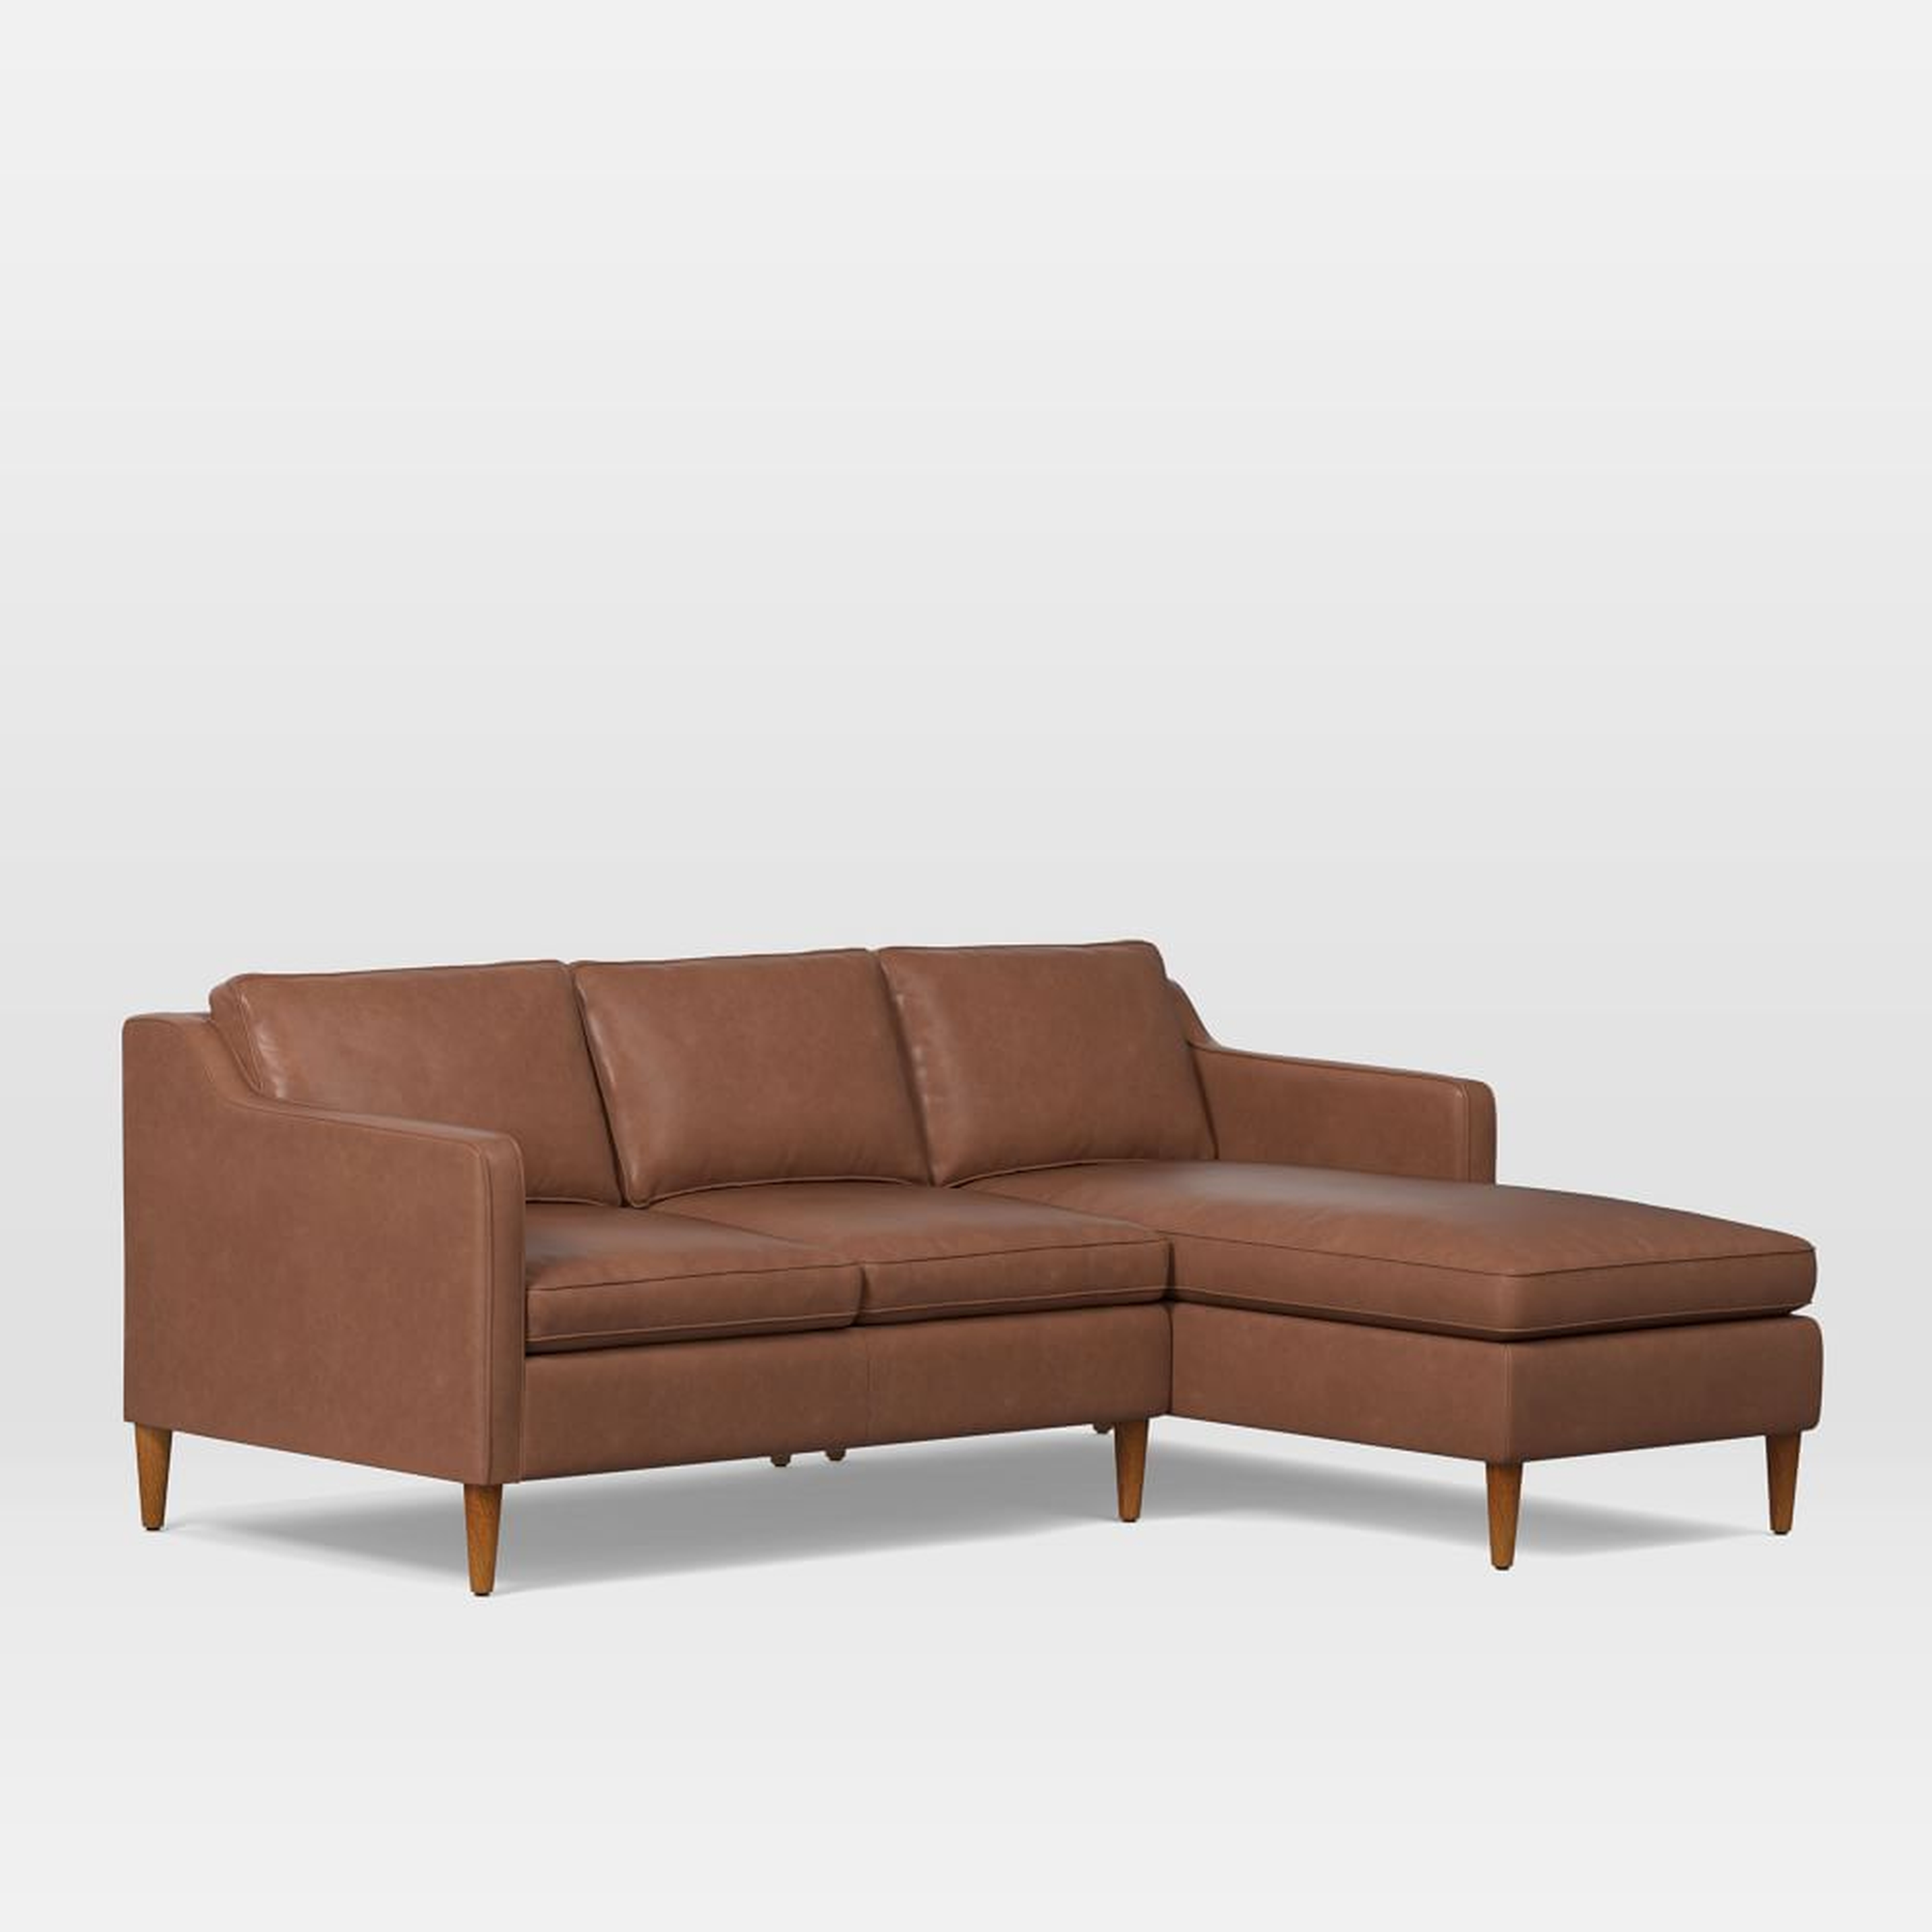 Hamilton 83" Right 2-Piece Chaise Sectional, Charme Leather, Cigar, Pecan - West Elm